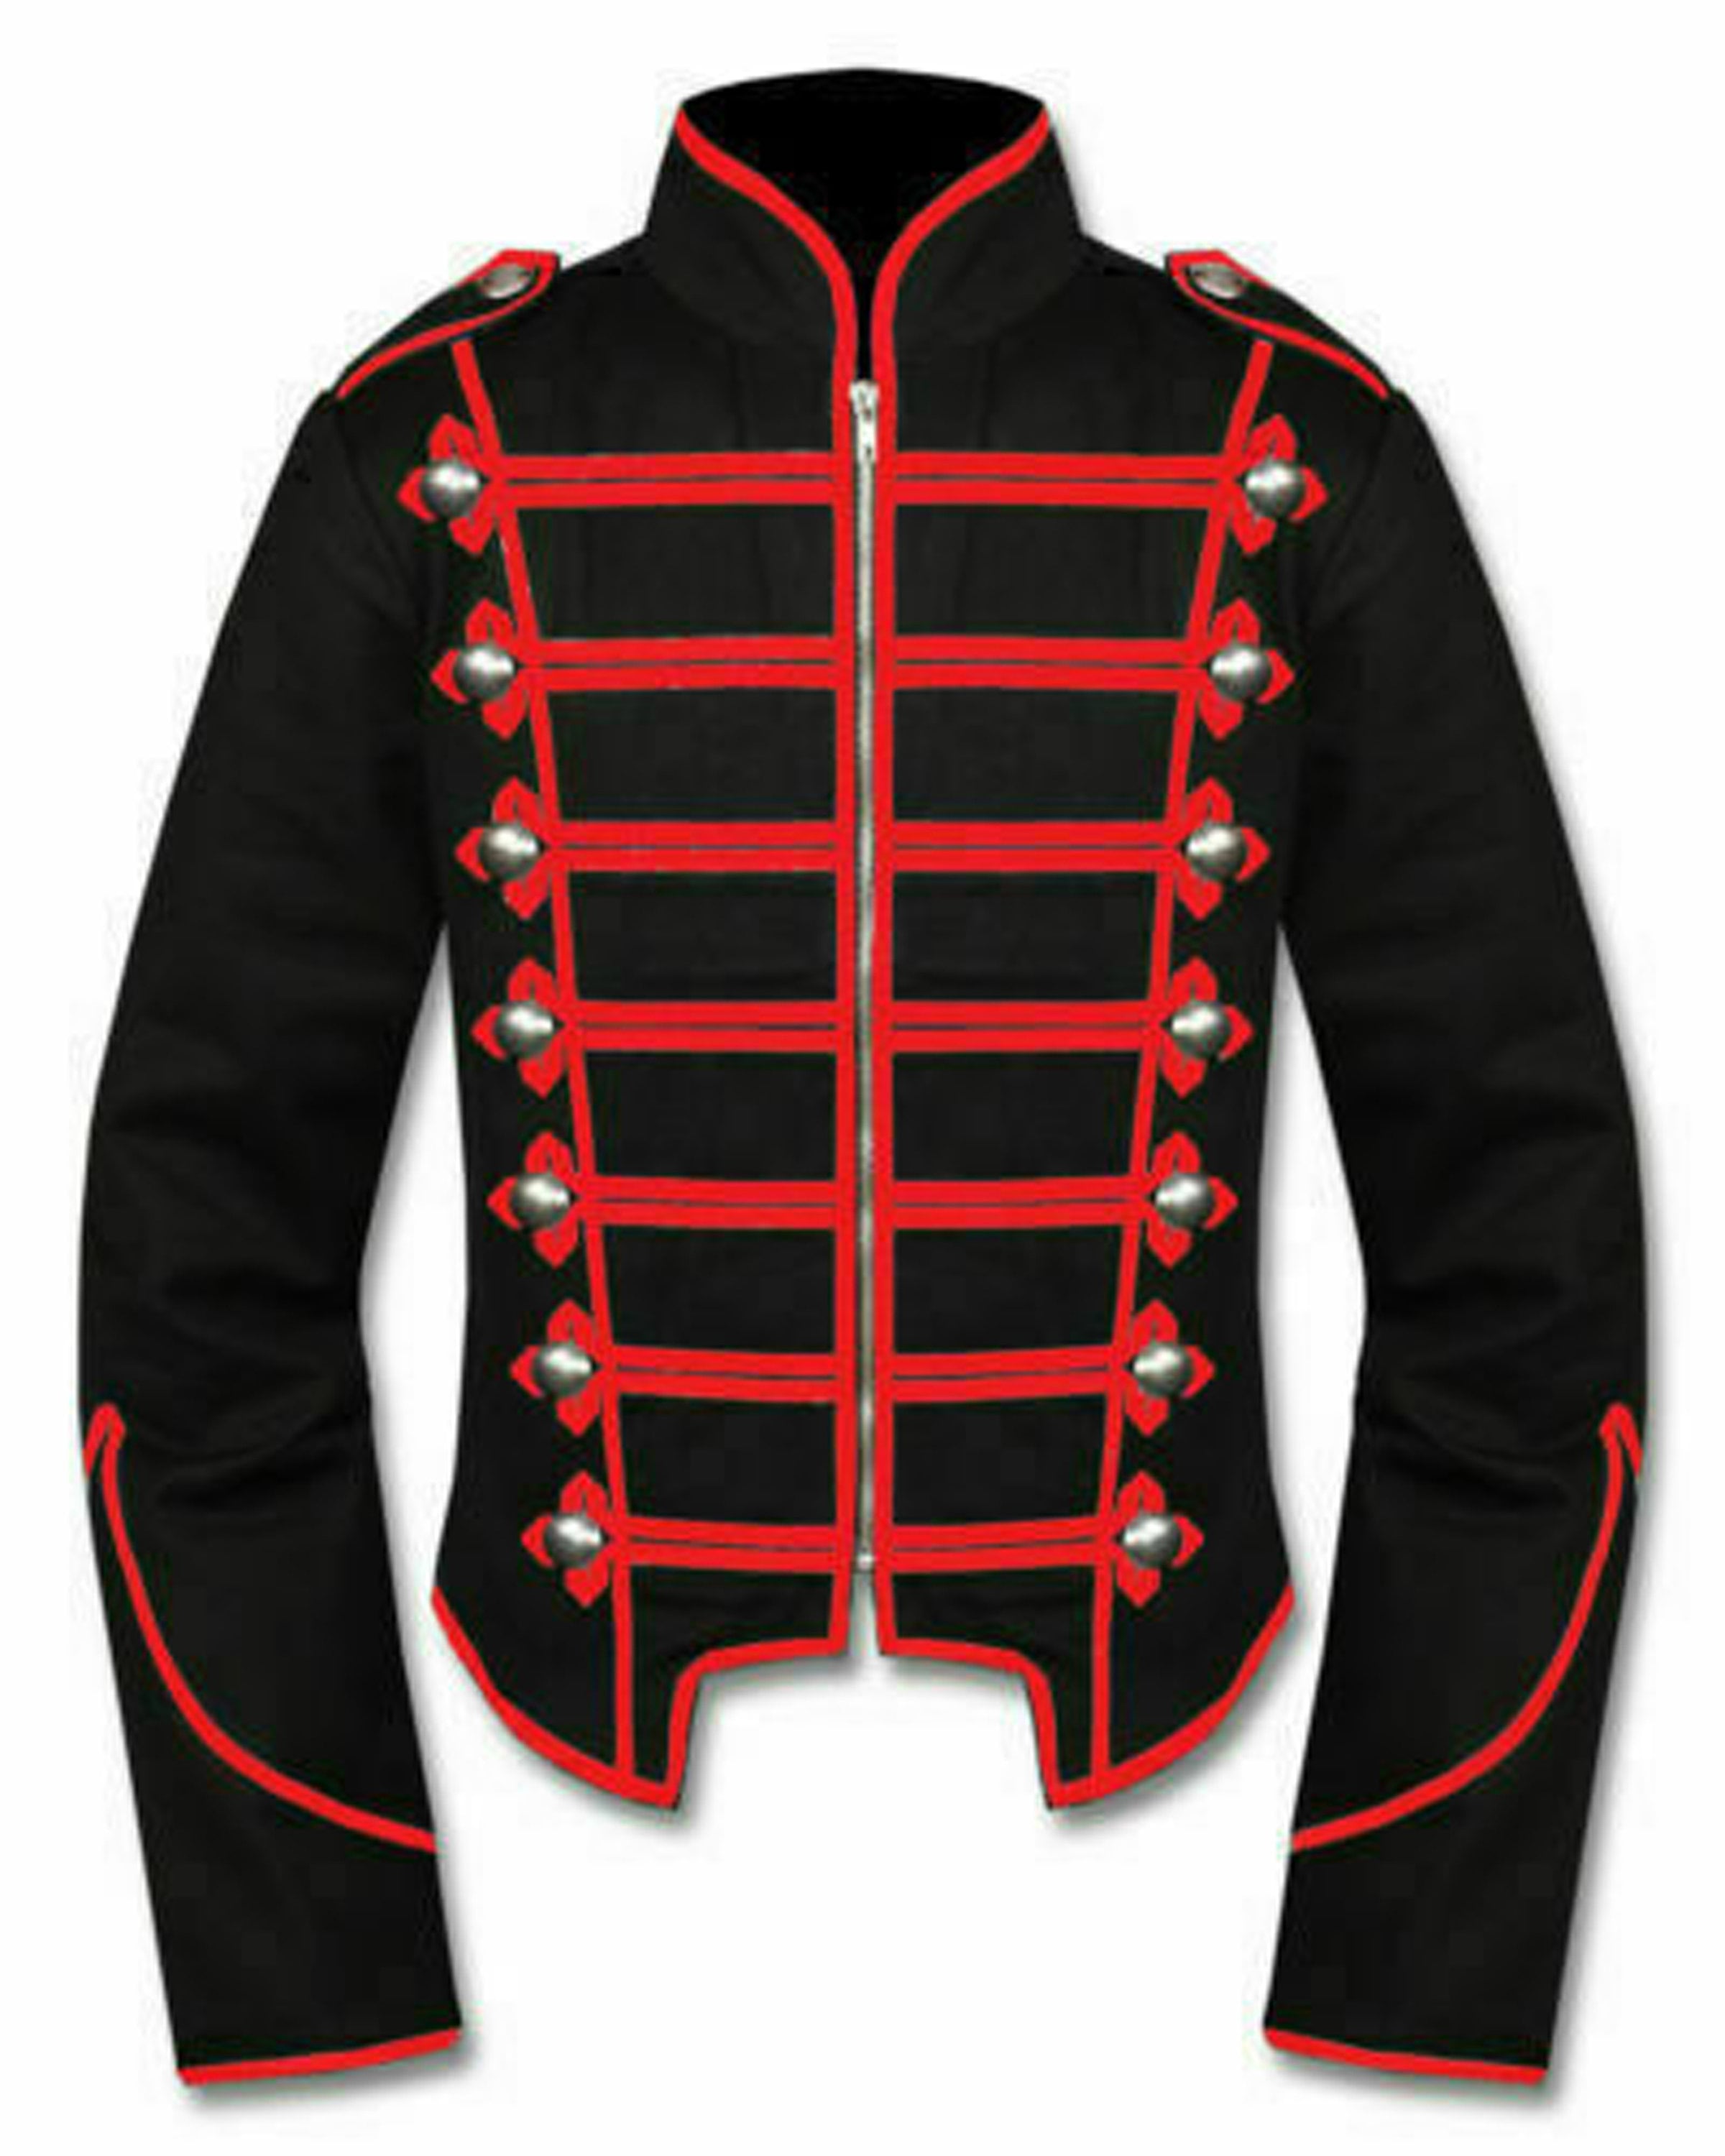 Blue Black Military Marching Band Drummer Jacket Military 